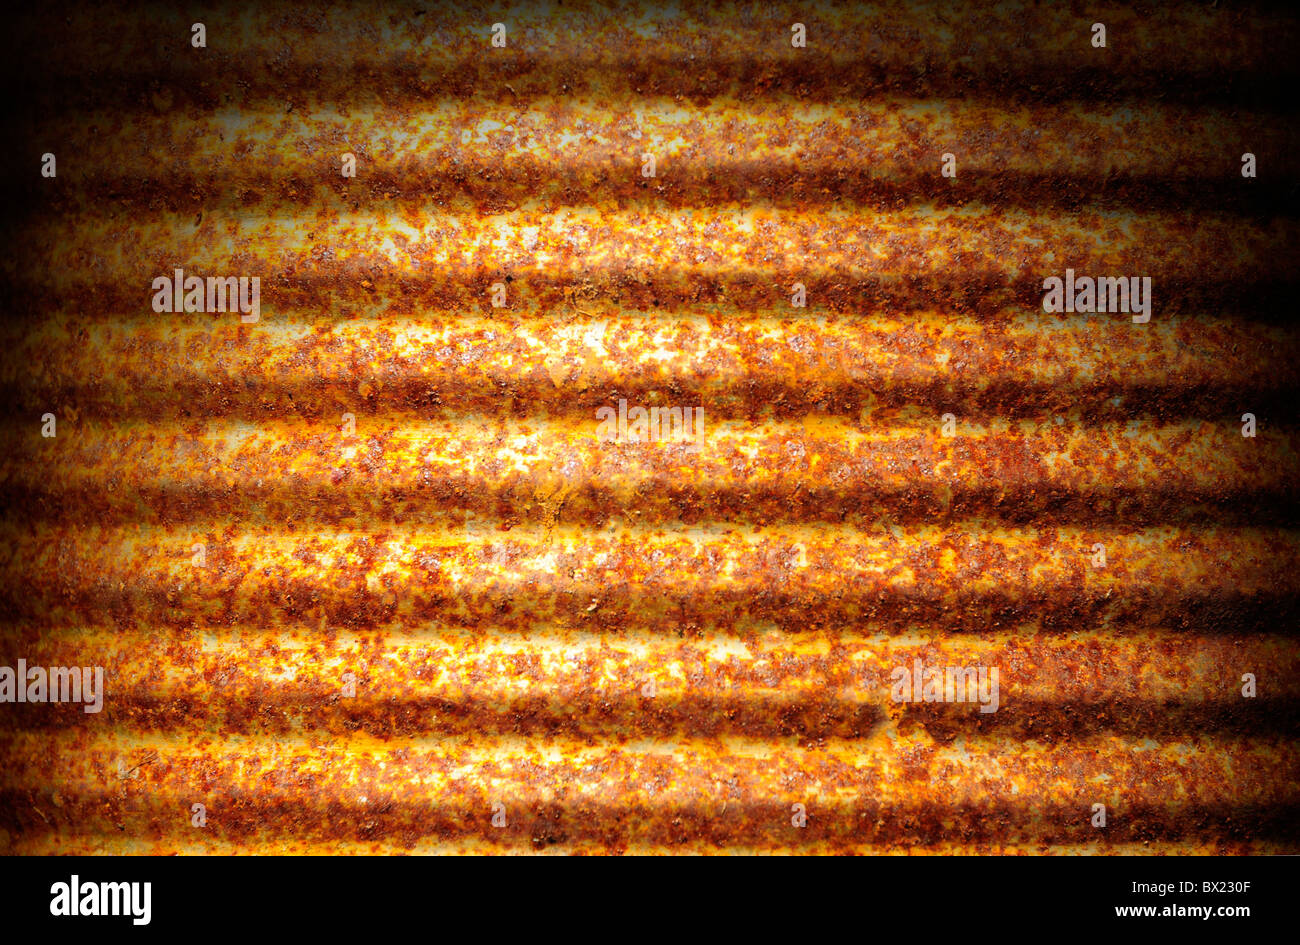 Rusty corrugated metal can surface lit dramatically from above Stock Photo